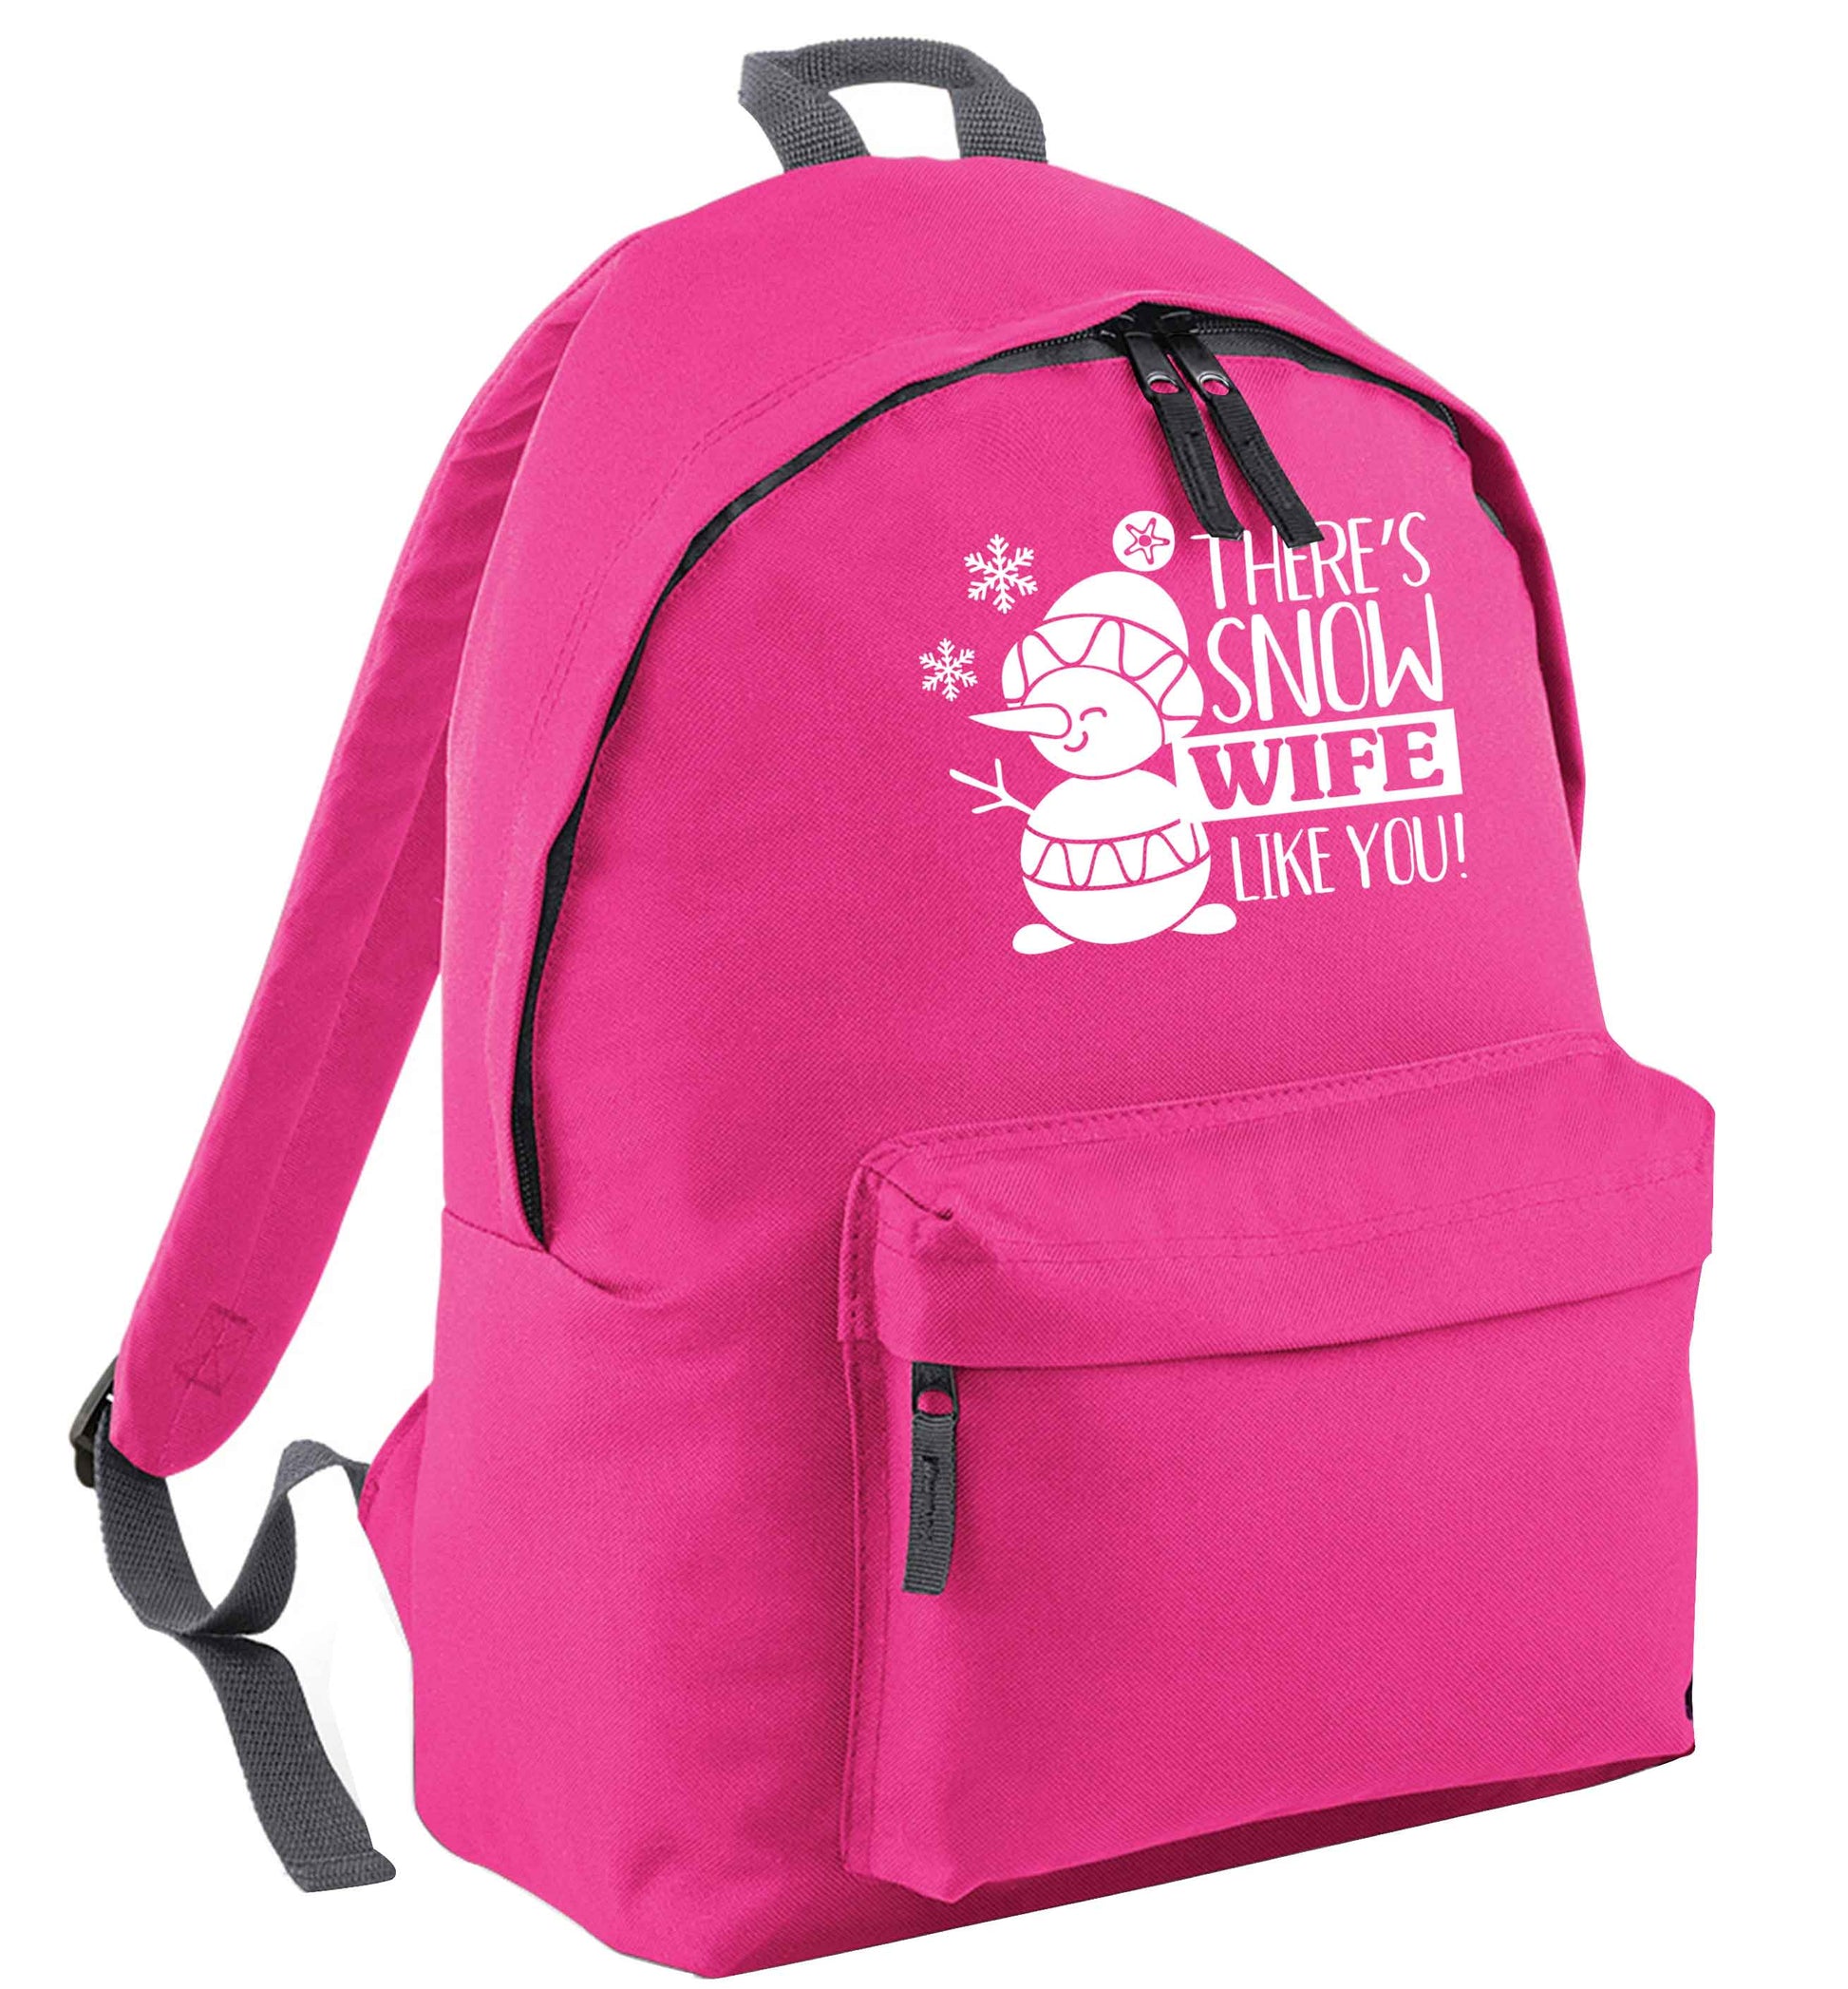 There's snow wife like you pink adults backpack